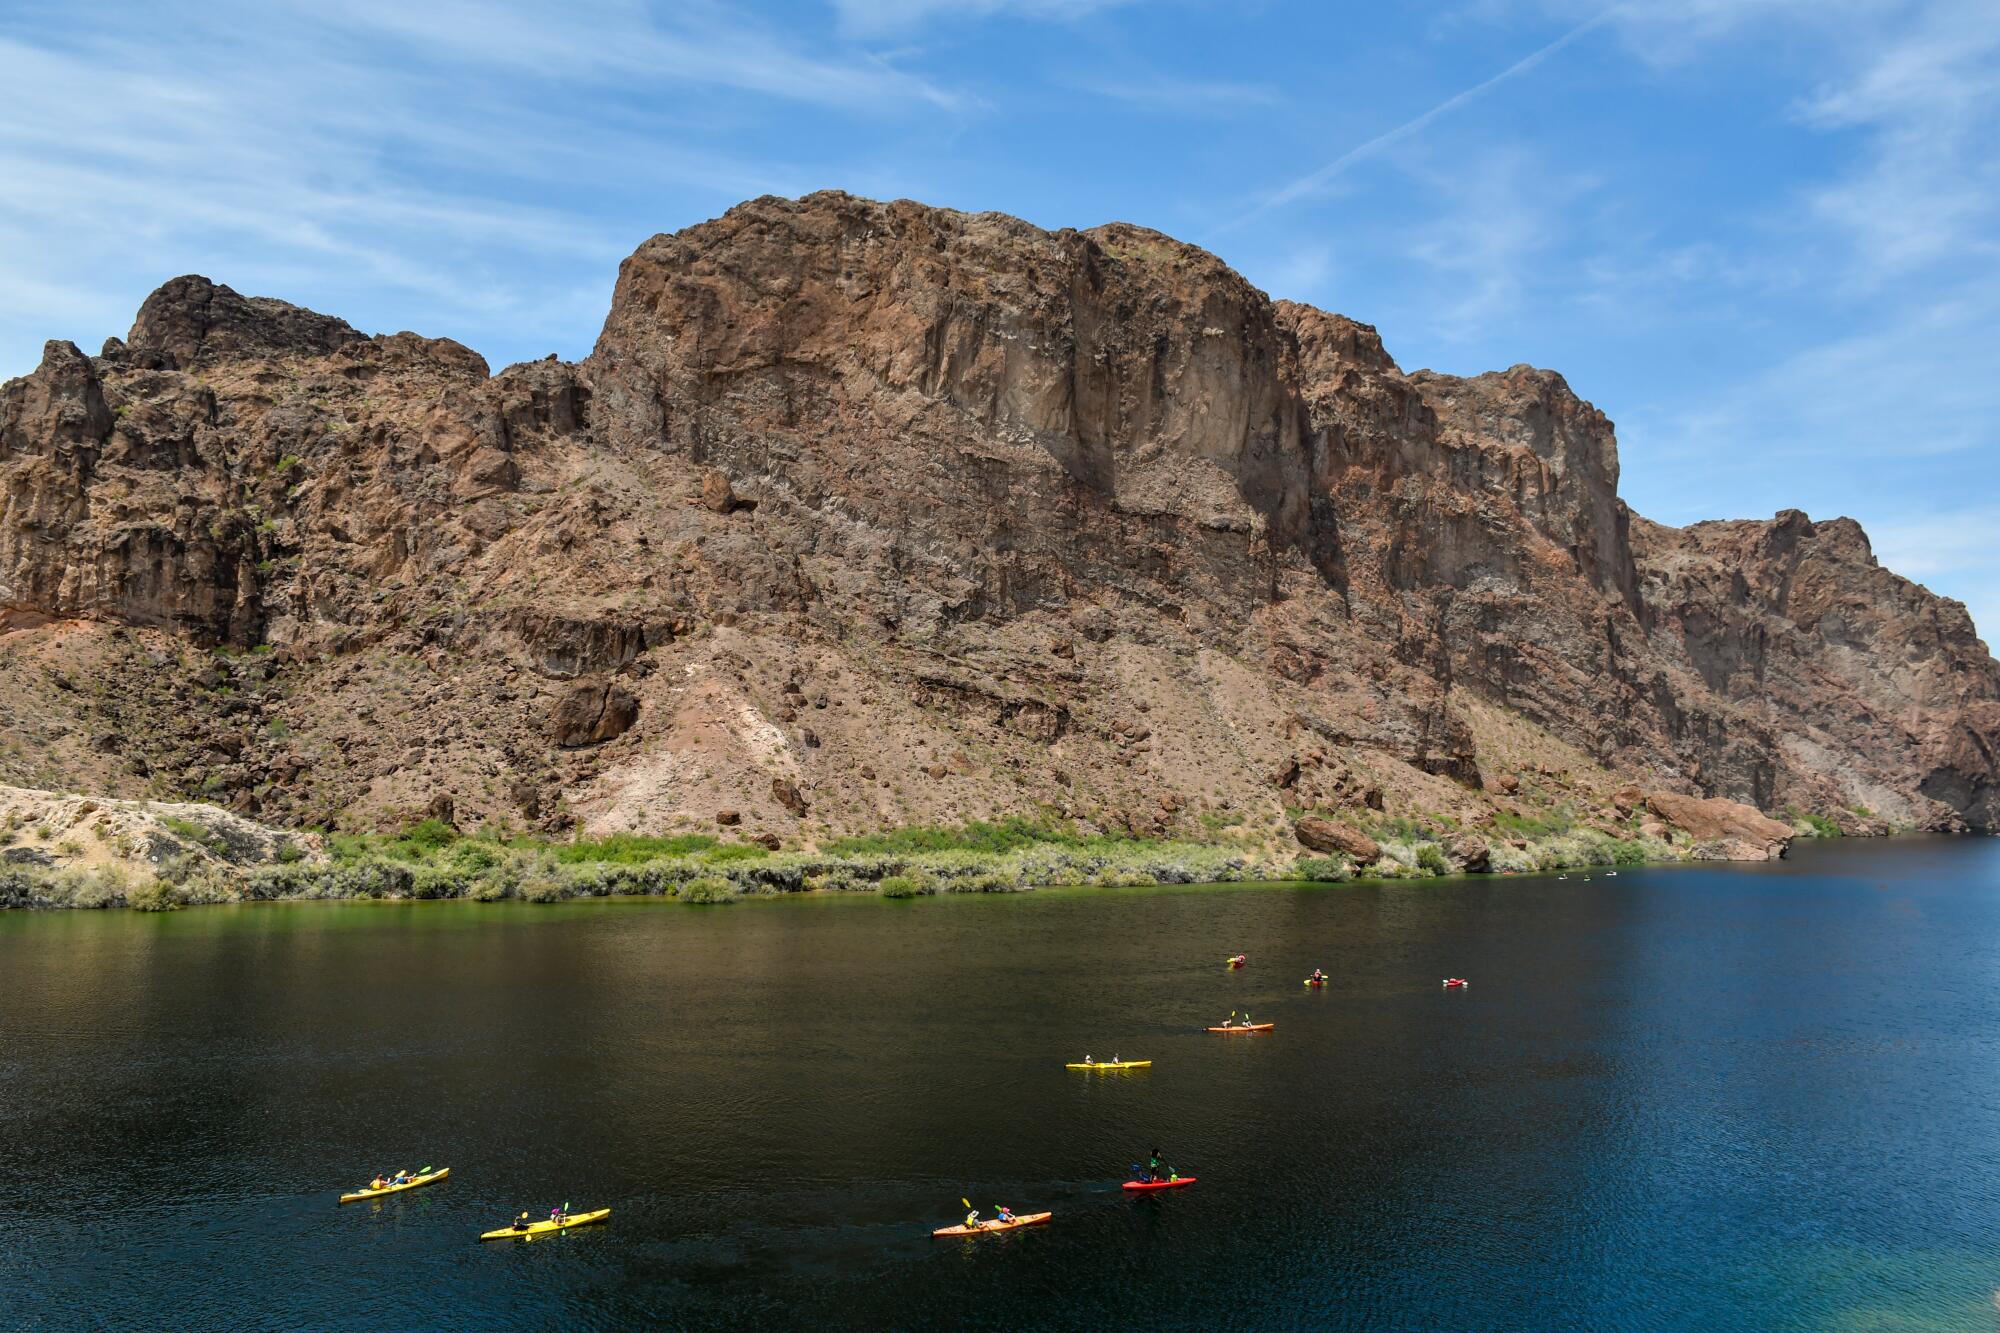 Mountain buttes rise above kayaks floating in the Colorado River